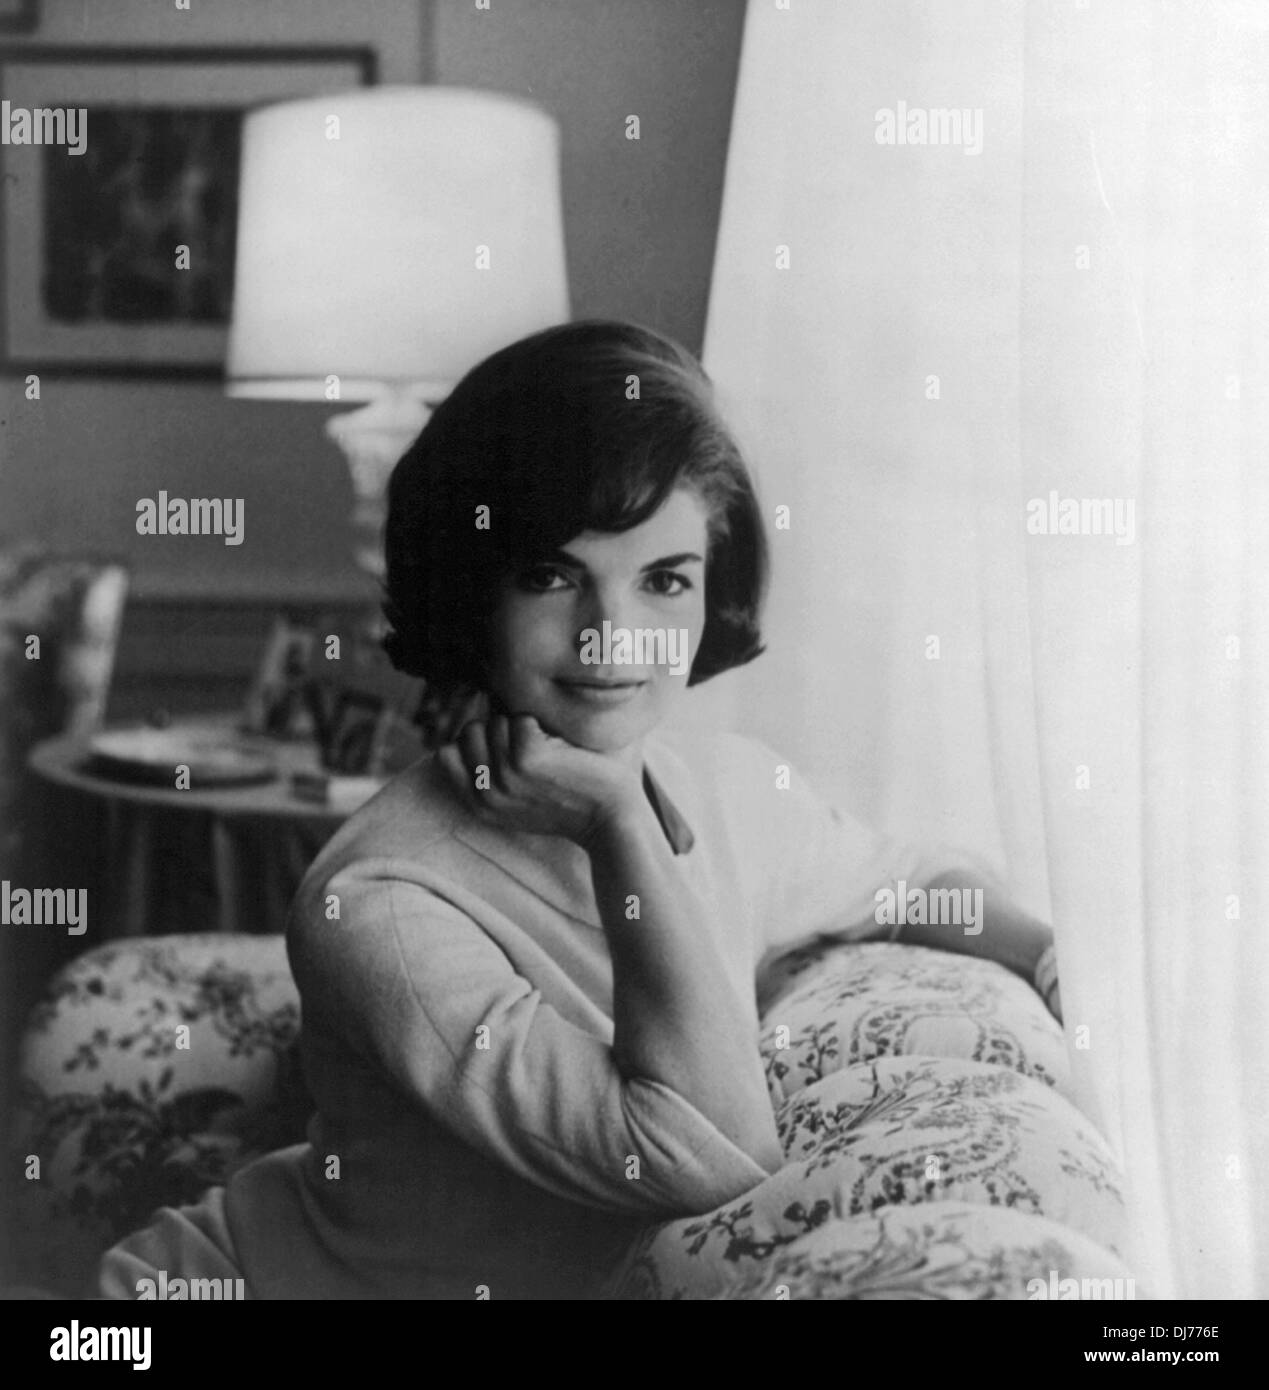 Jackie Kennedy, Jacqueline Kennedy Onassis Banque D'Images